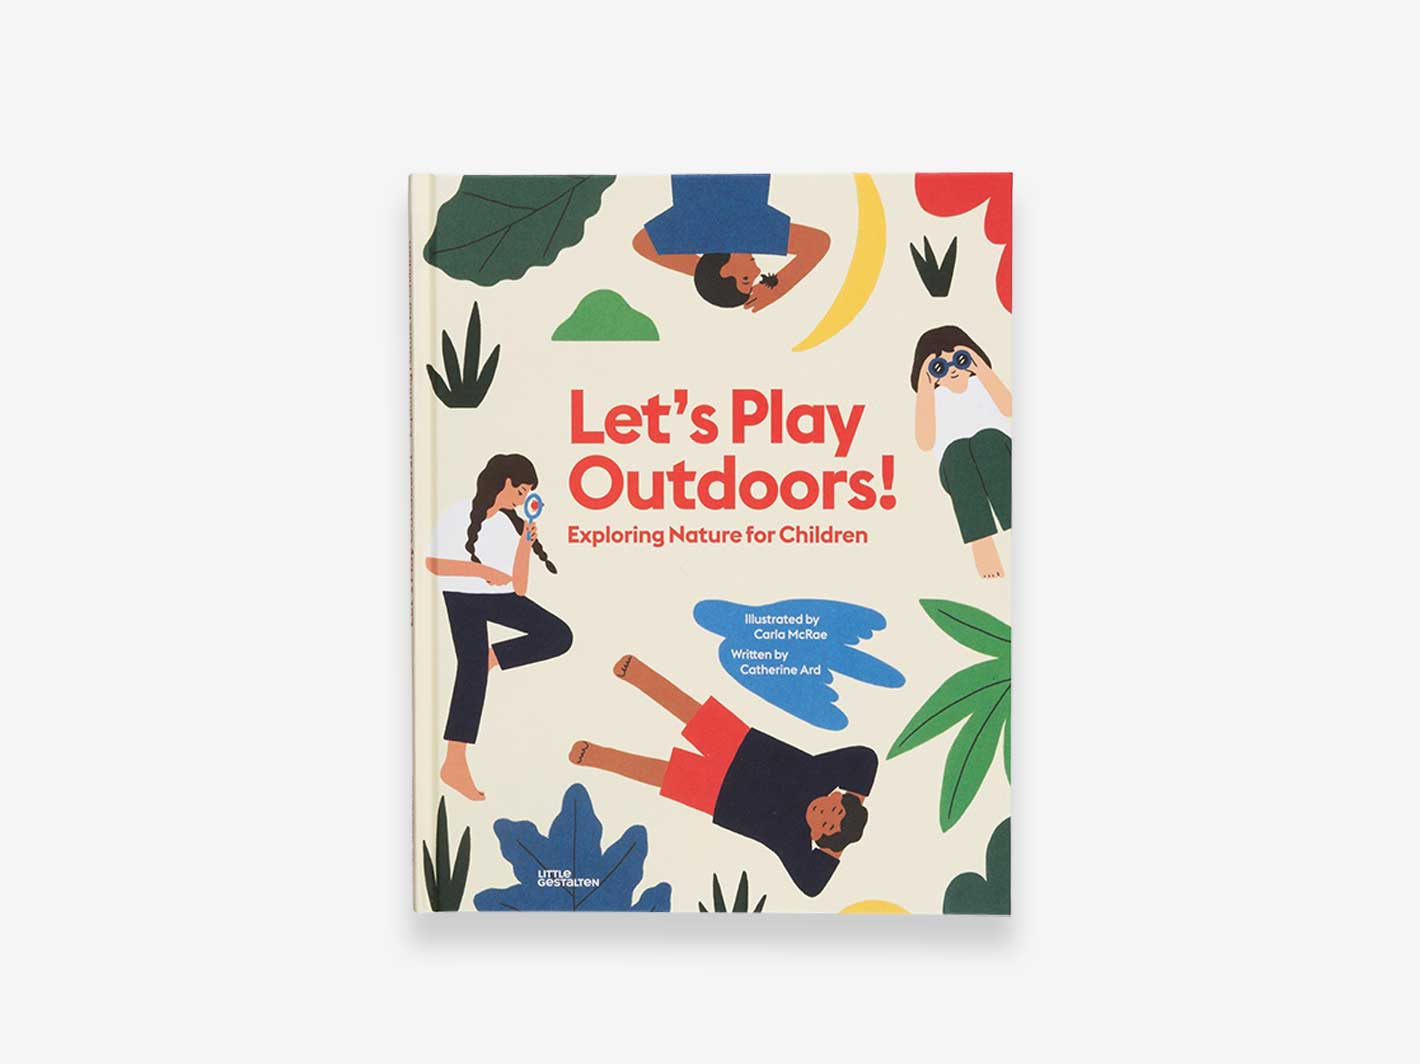 Let's Play Outdoors!